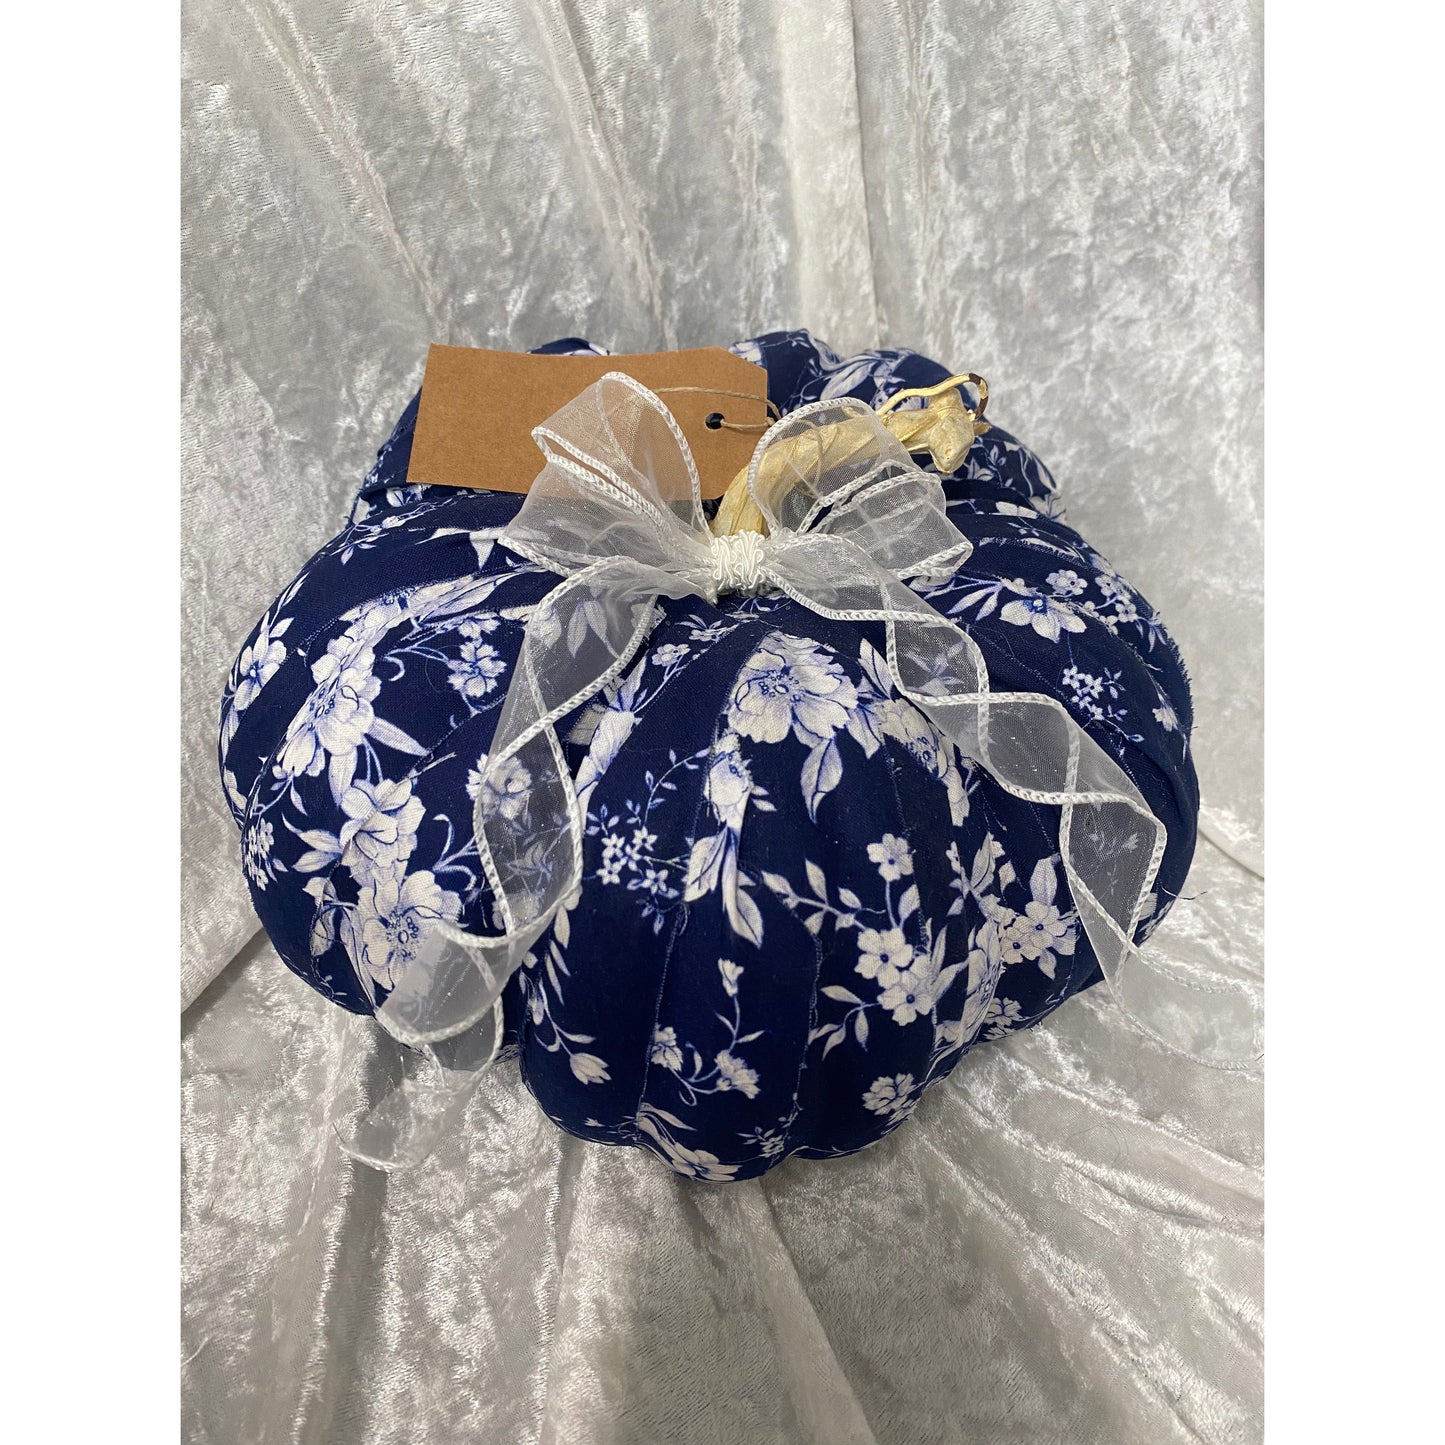 One of a Kind Fabric Decoupage Pumpkin in Dark Chinoiserie with White Bow Large A